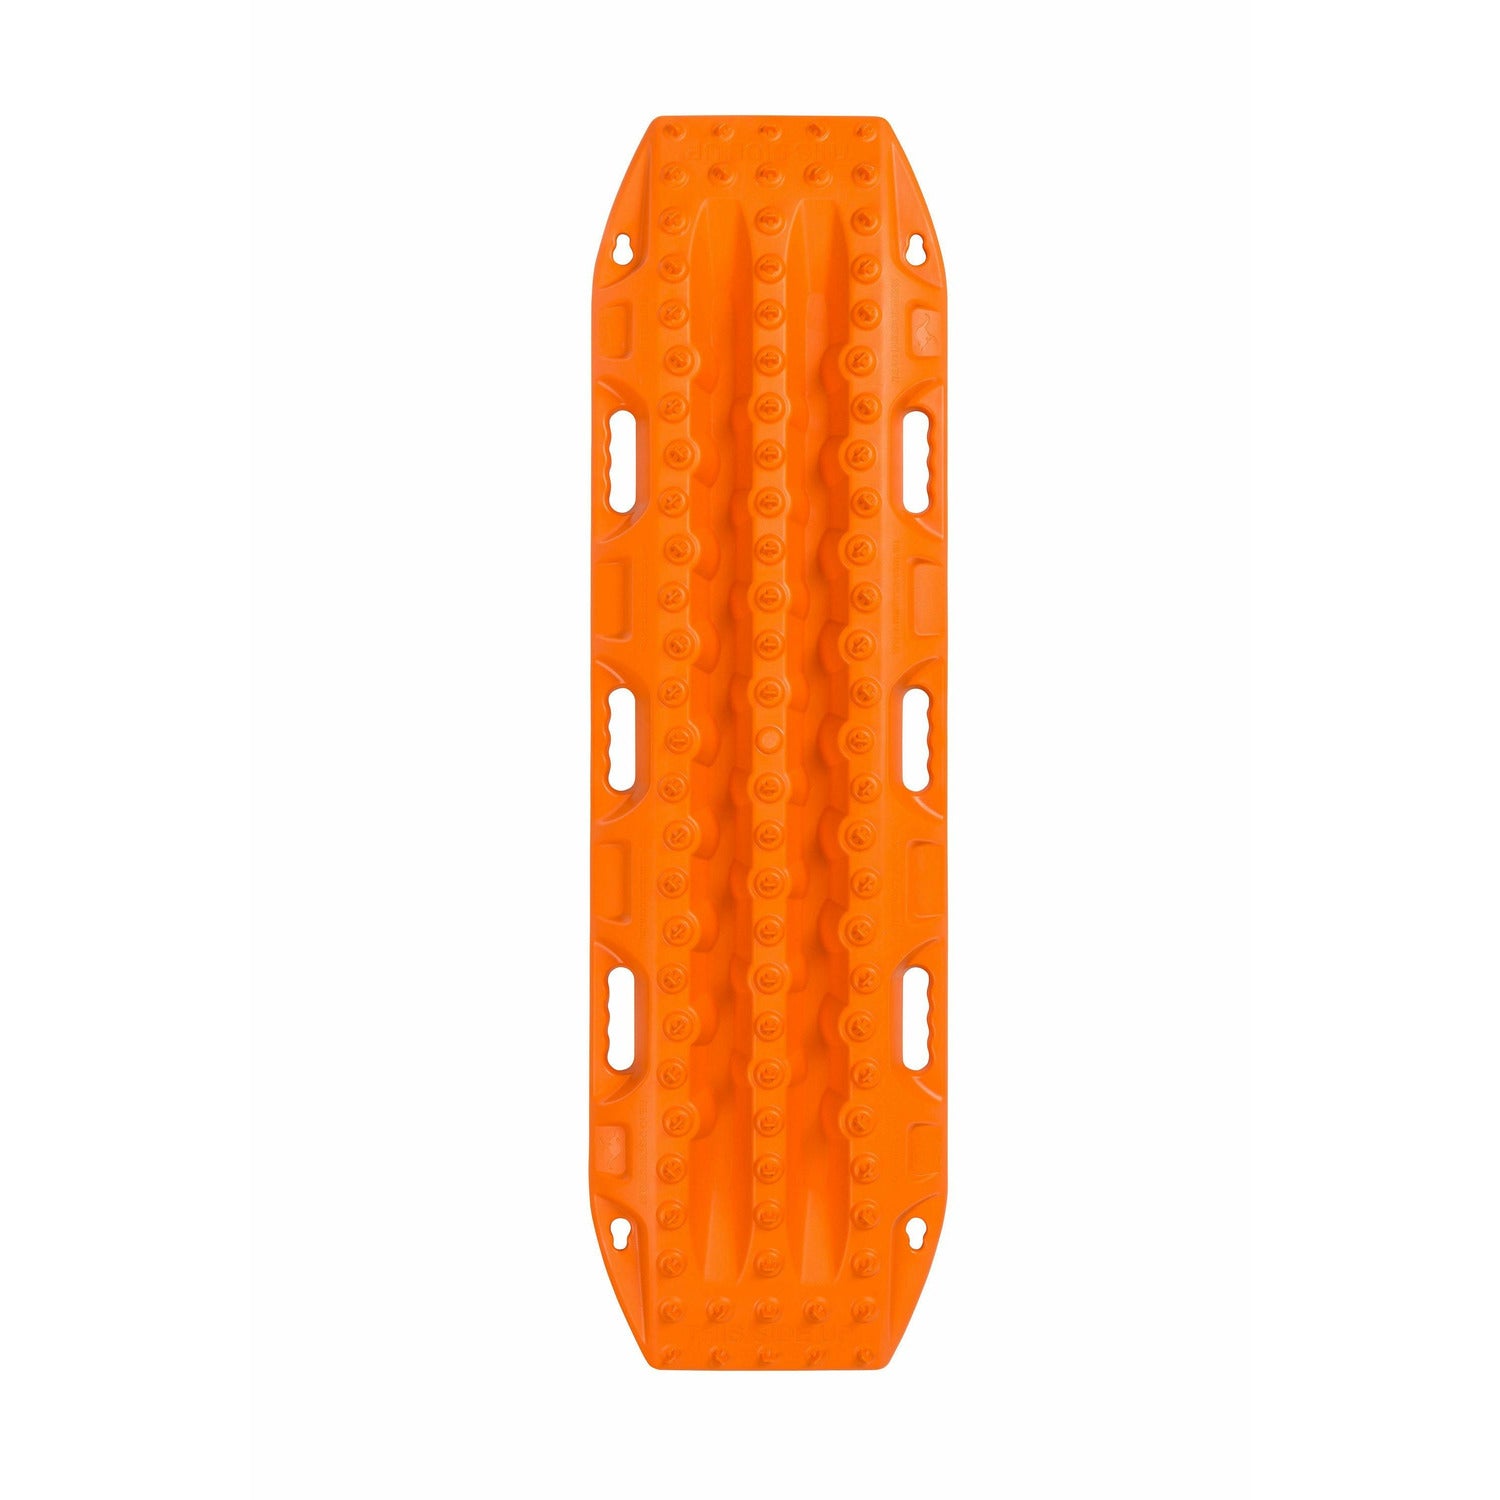 MAXTRAX MKII Signature Orange Recovery Boards  Recovery Gear MAXTRAX- Overland Kitted